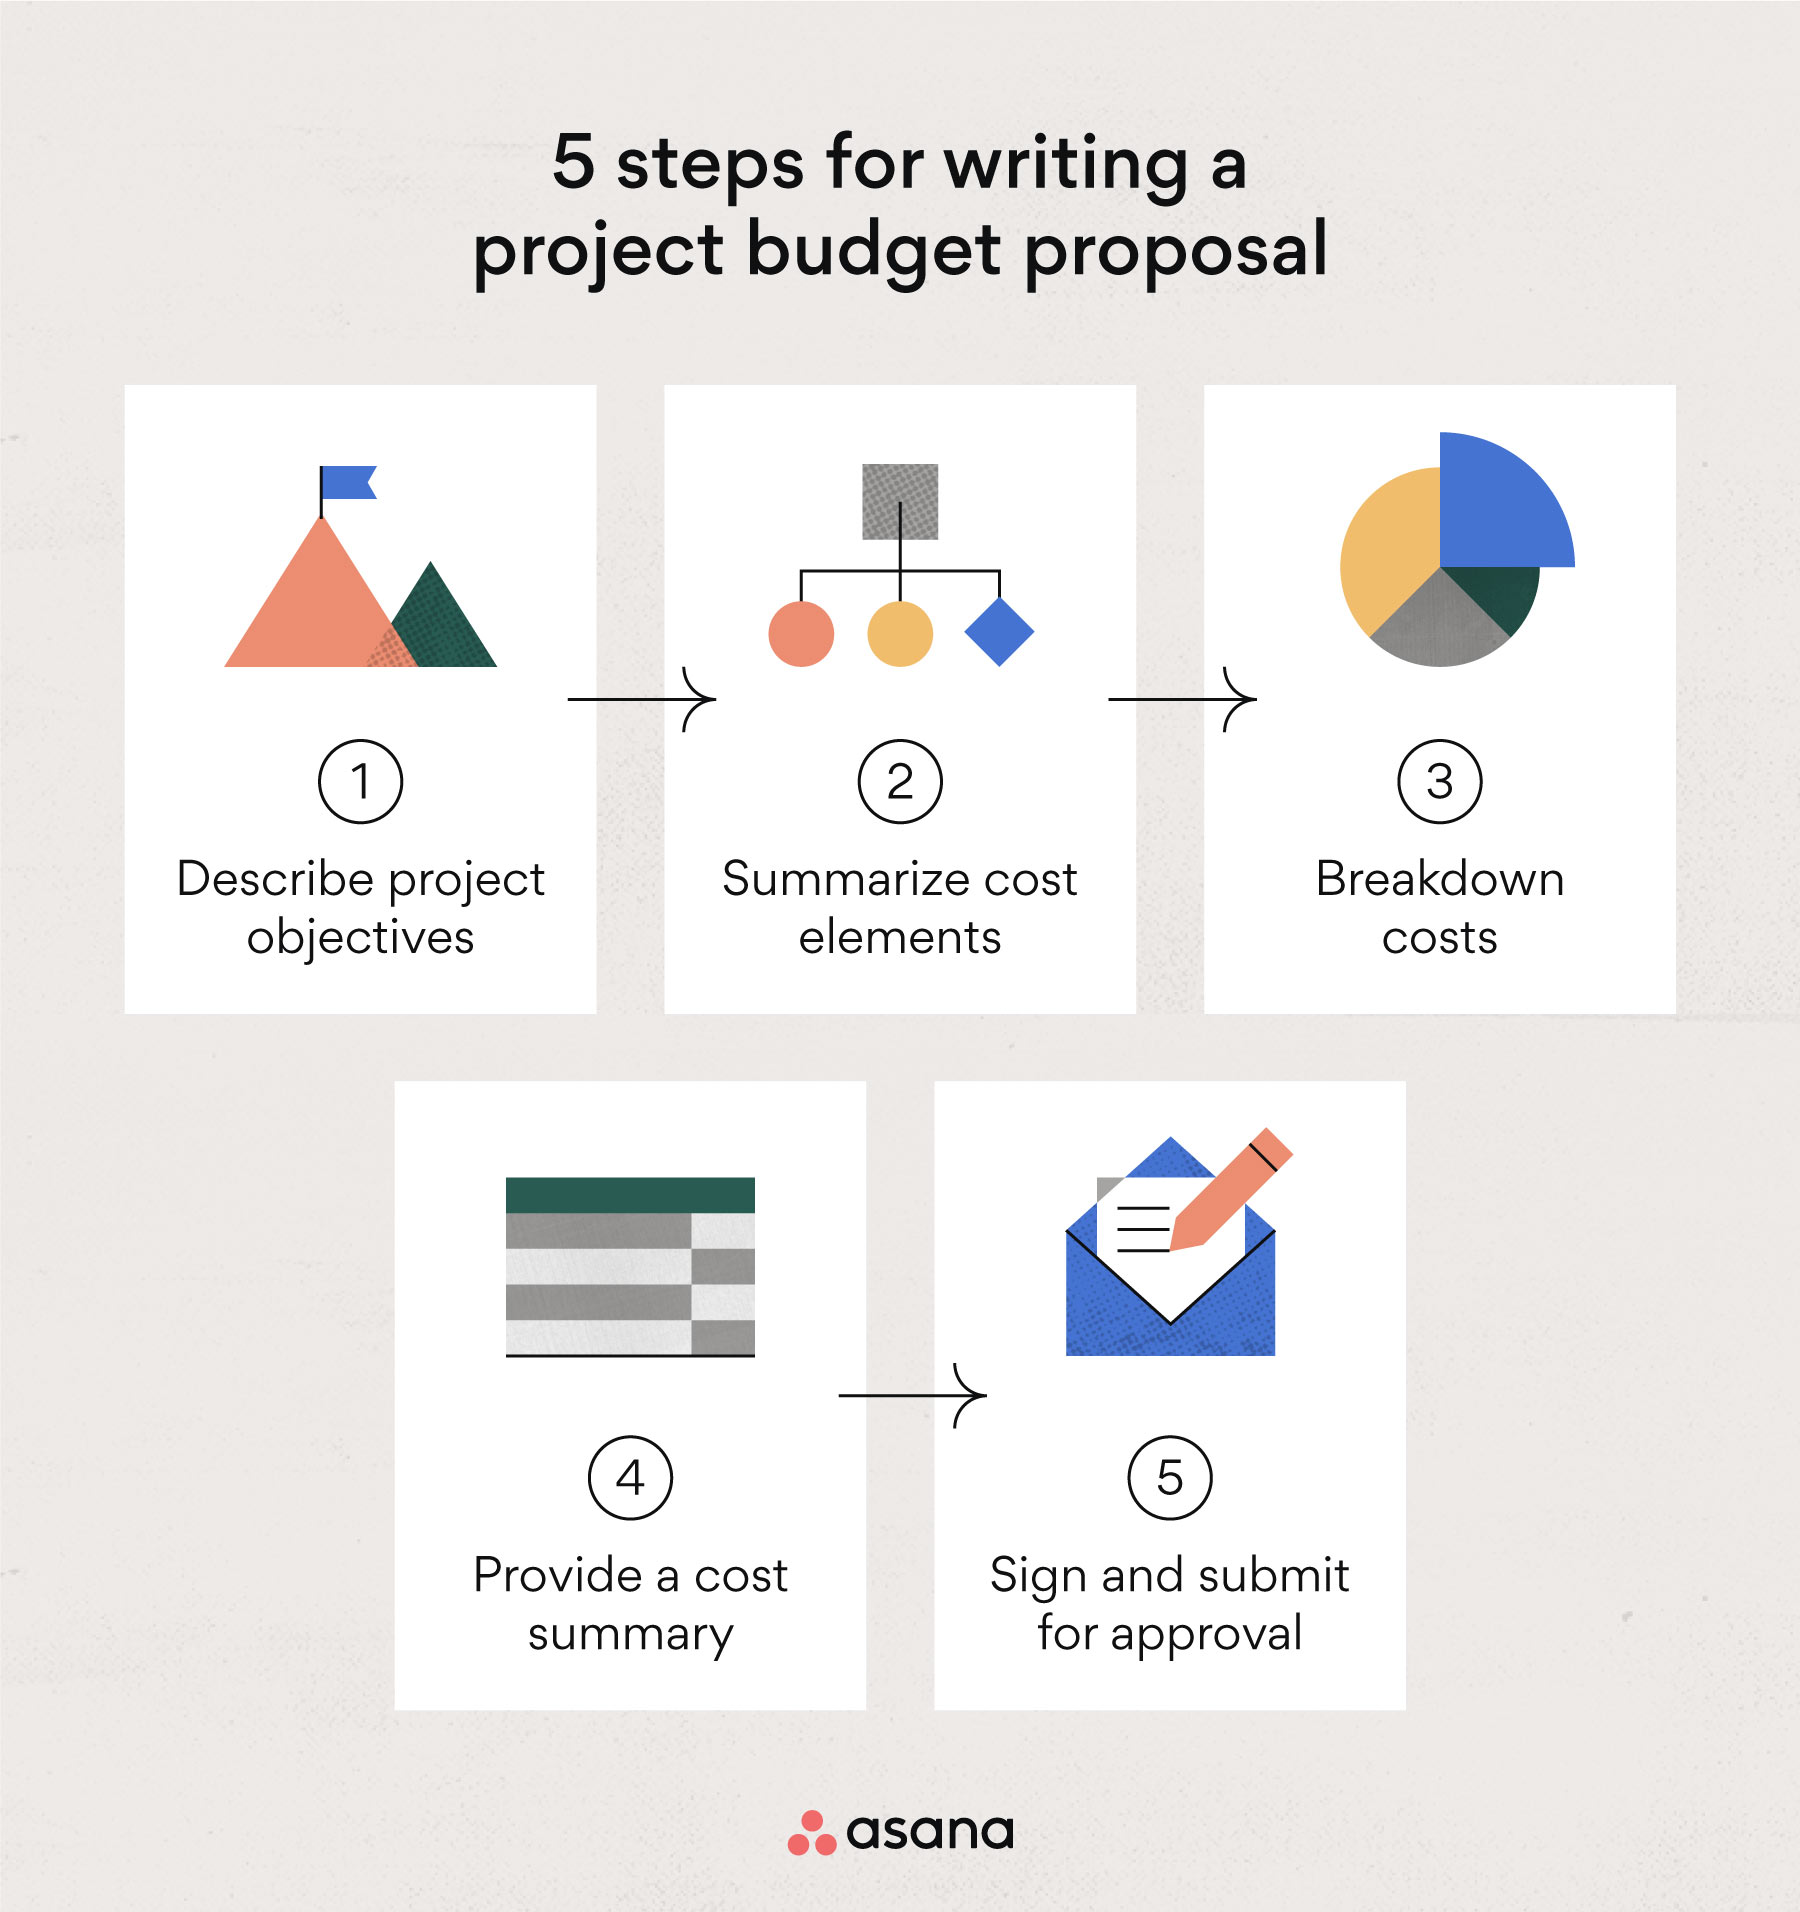 5 steps for writing a project budget proposal